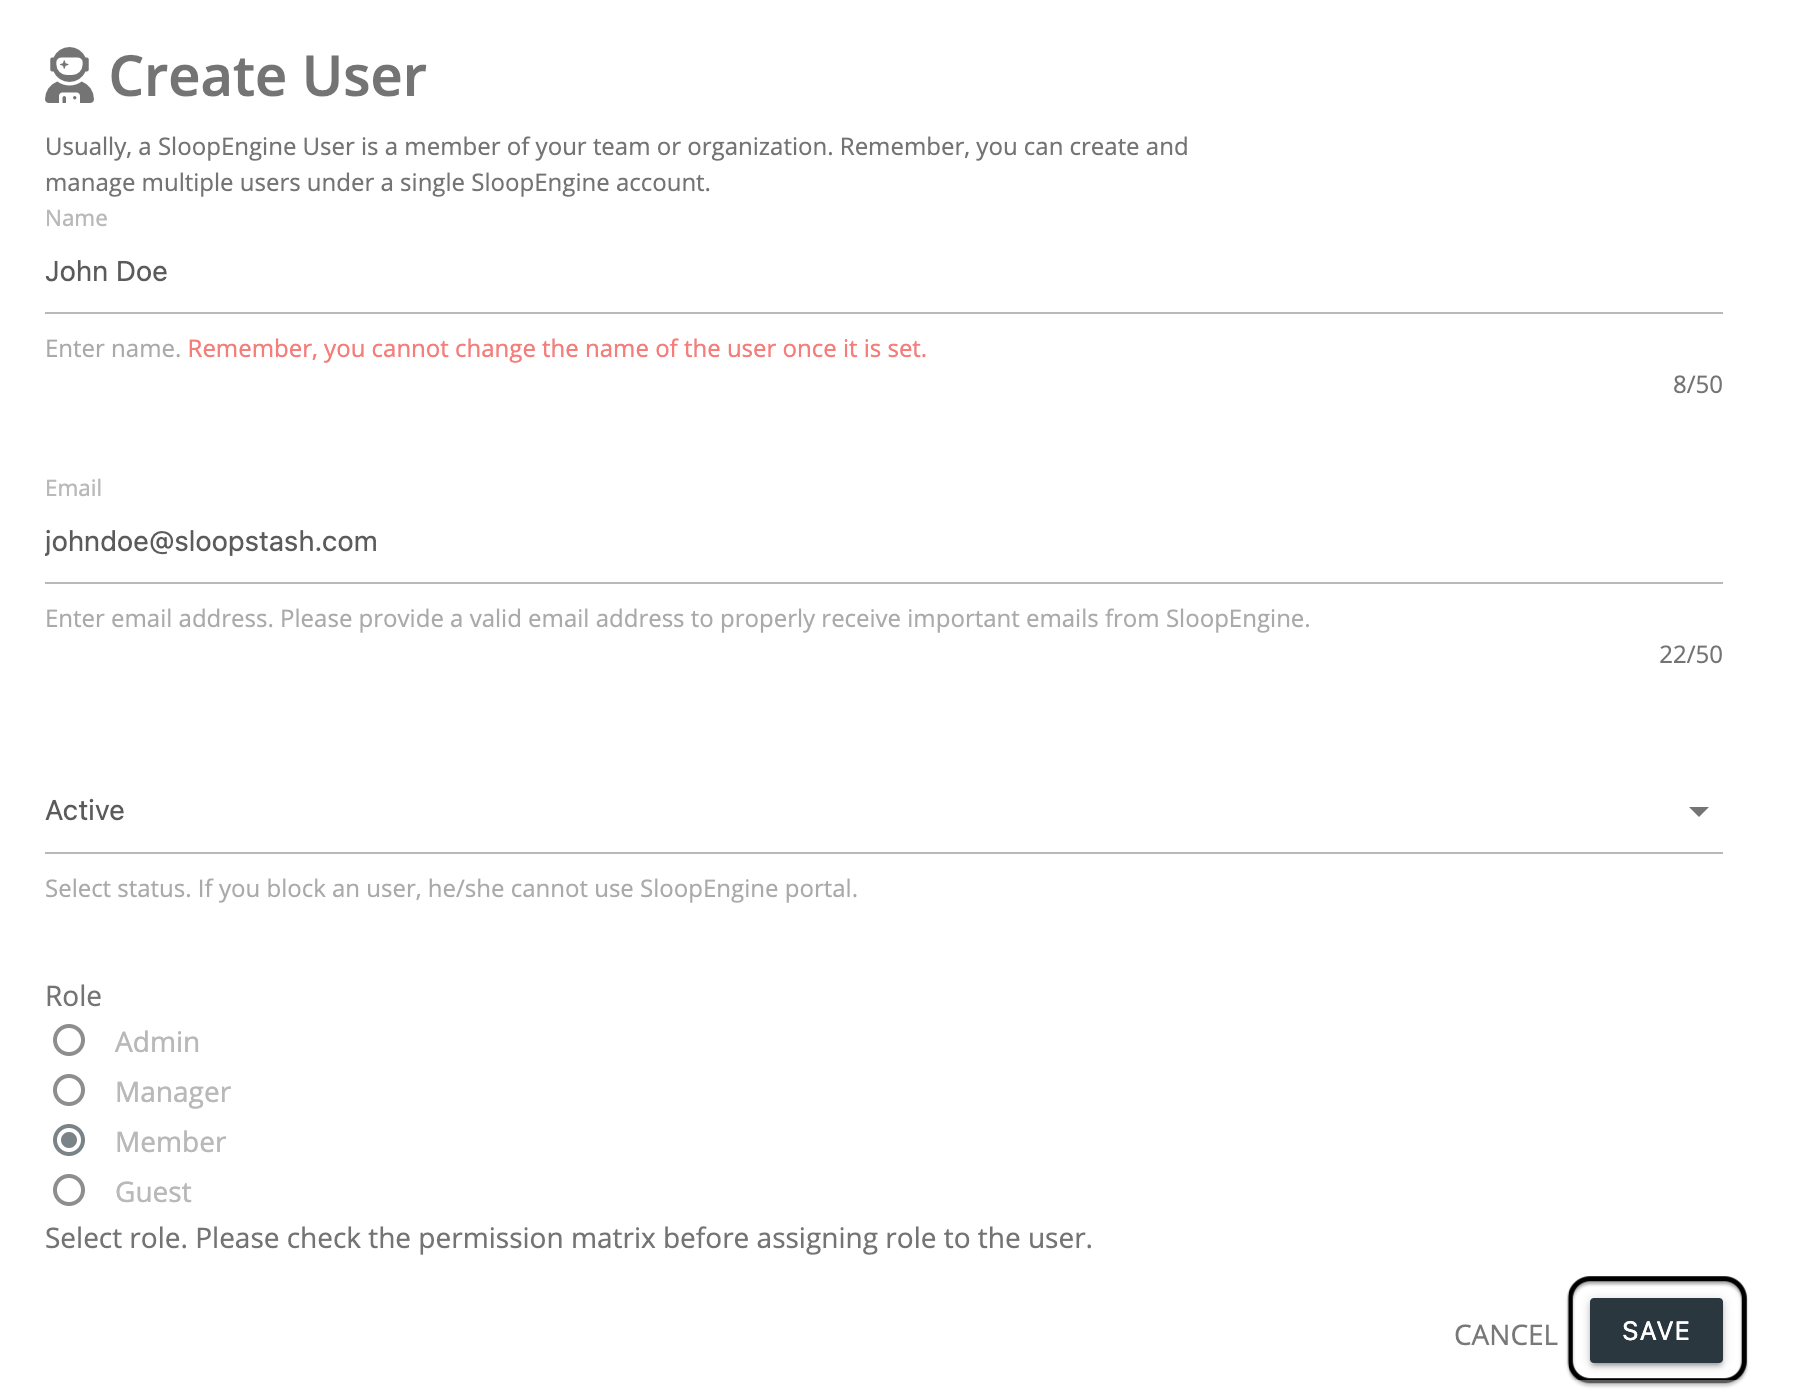 Screenshot of the account user creation form with valid information.